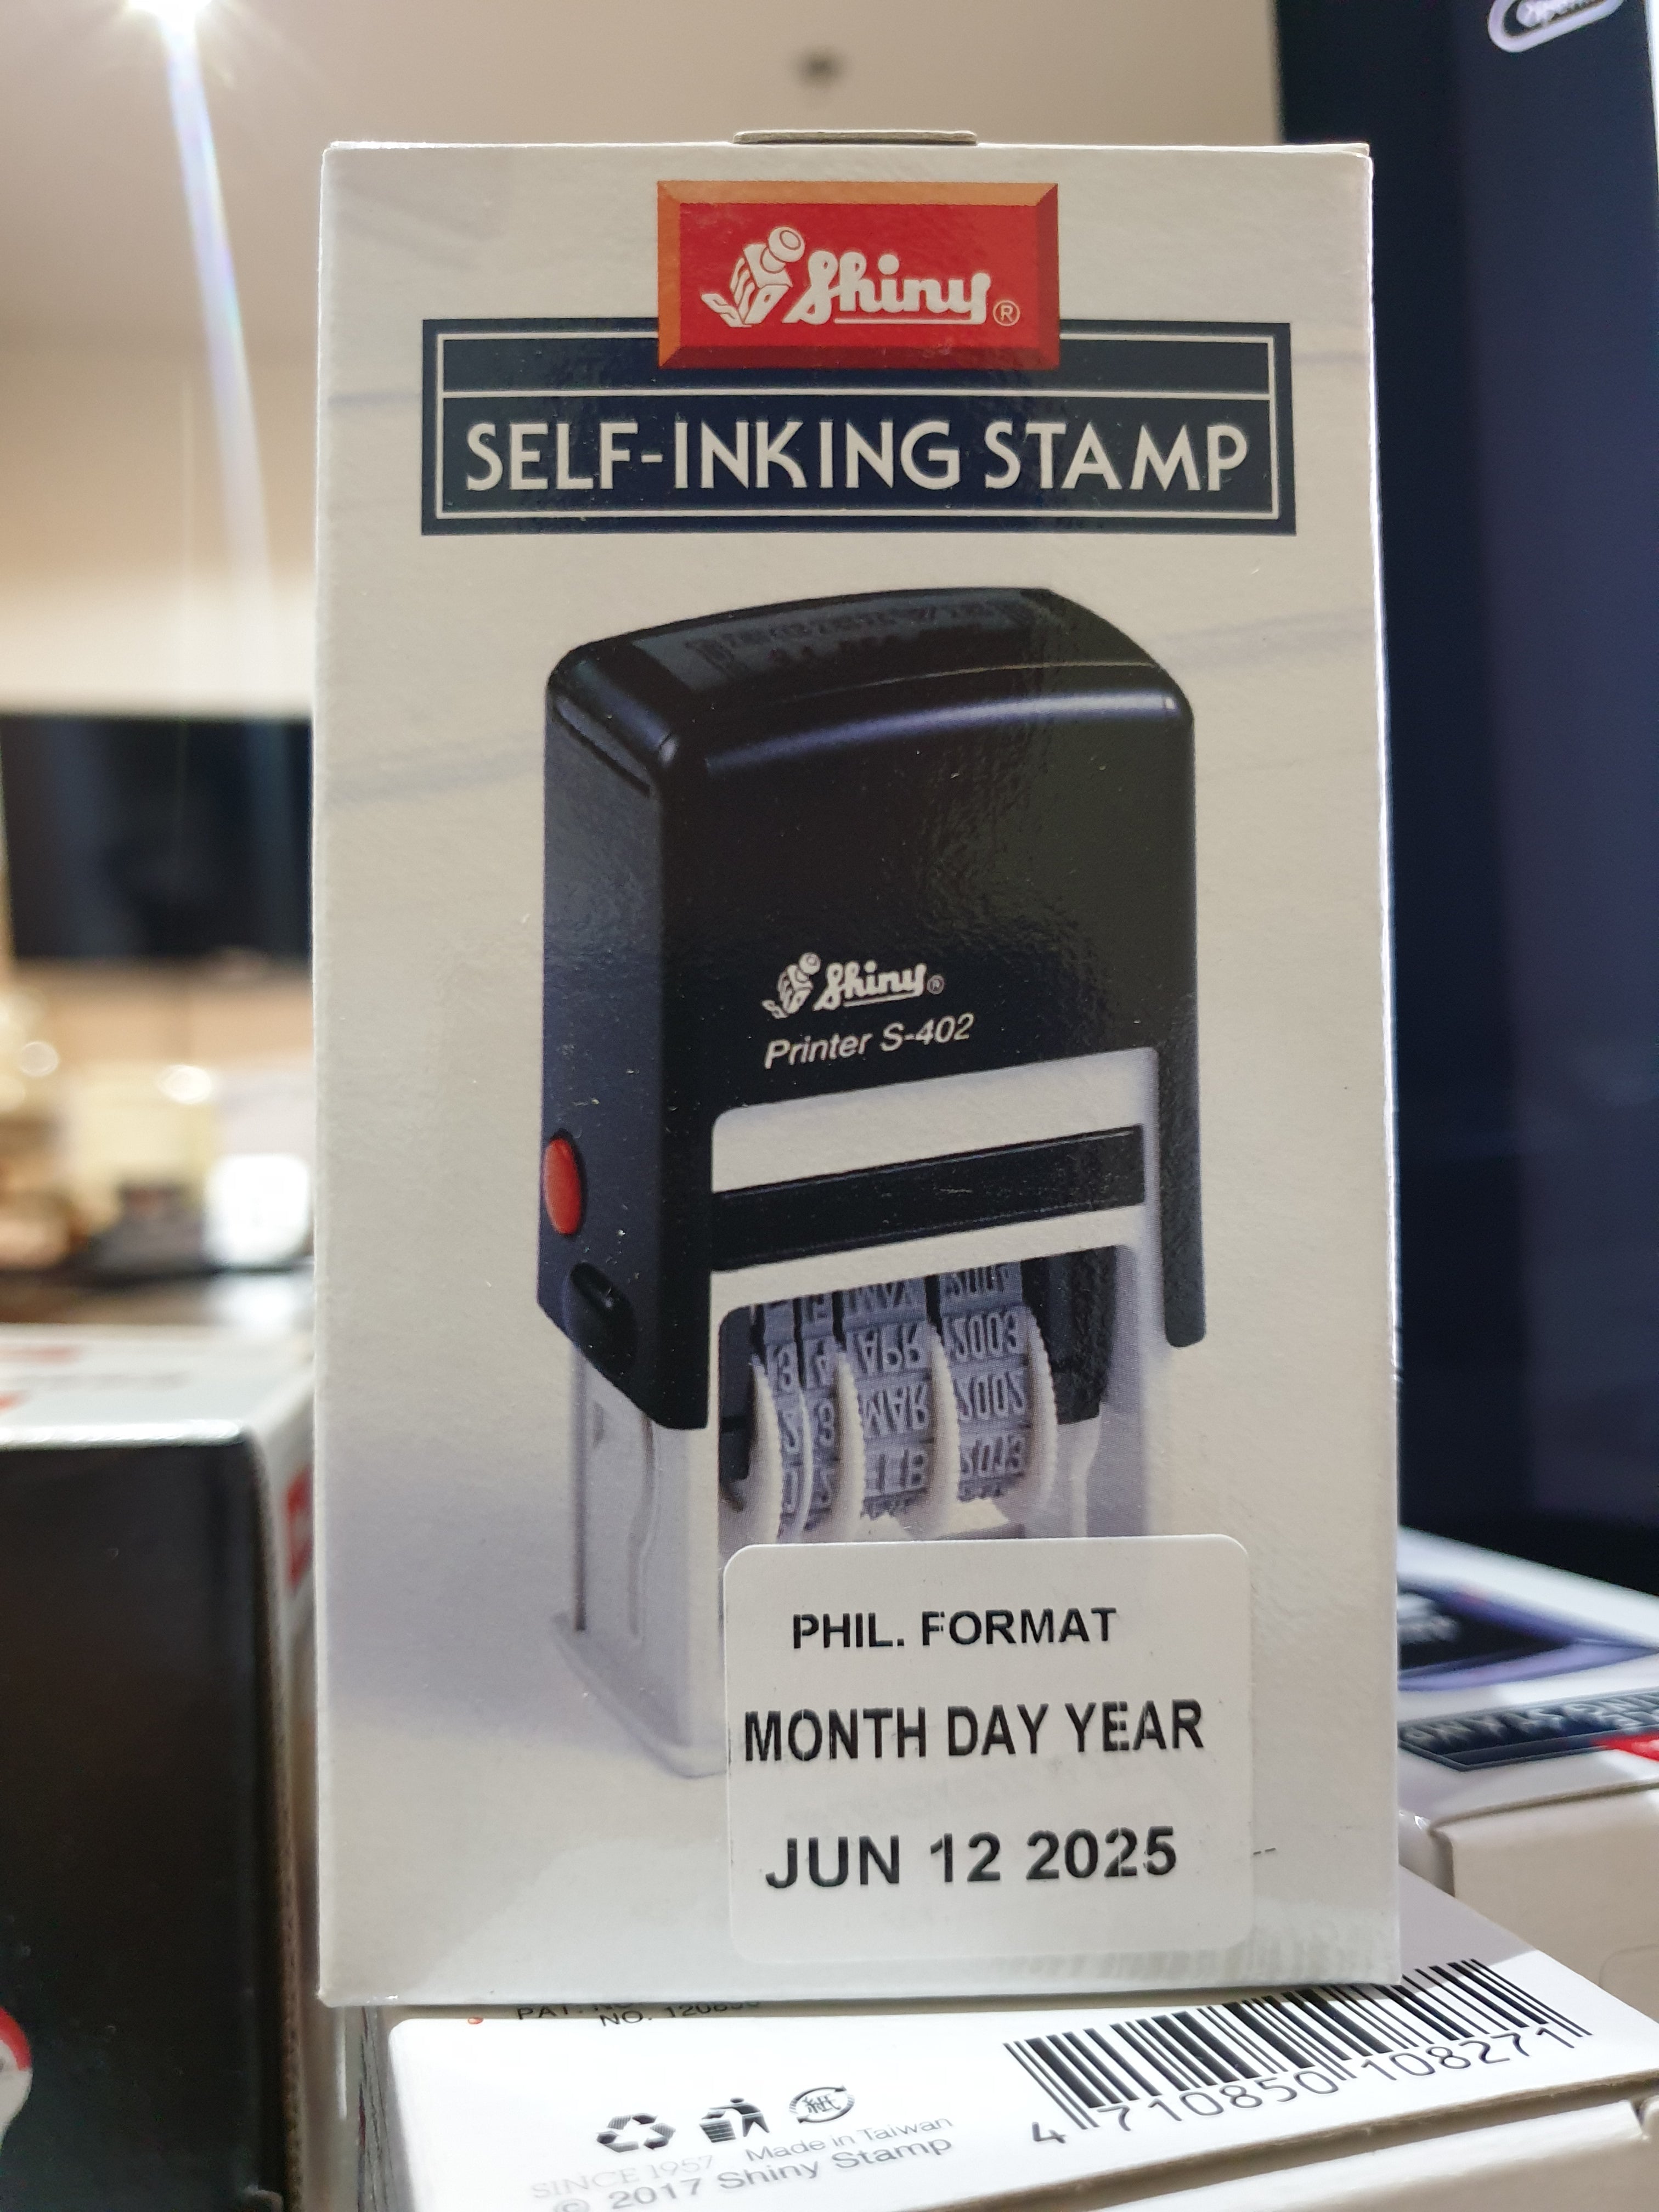 S-402 Shiny Self-Inking Stamp RECEIVED